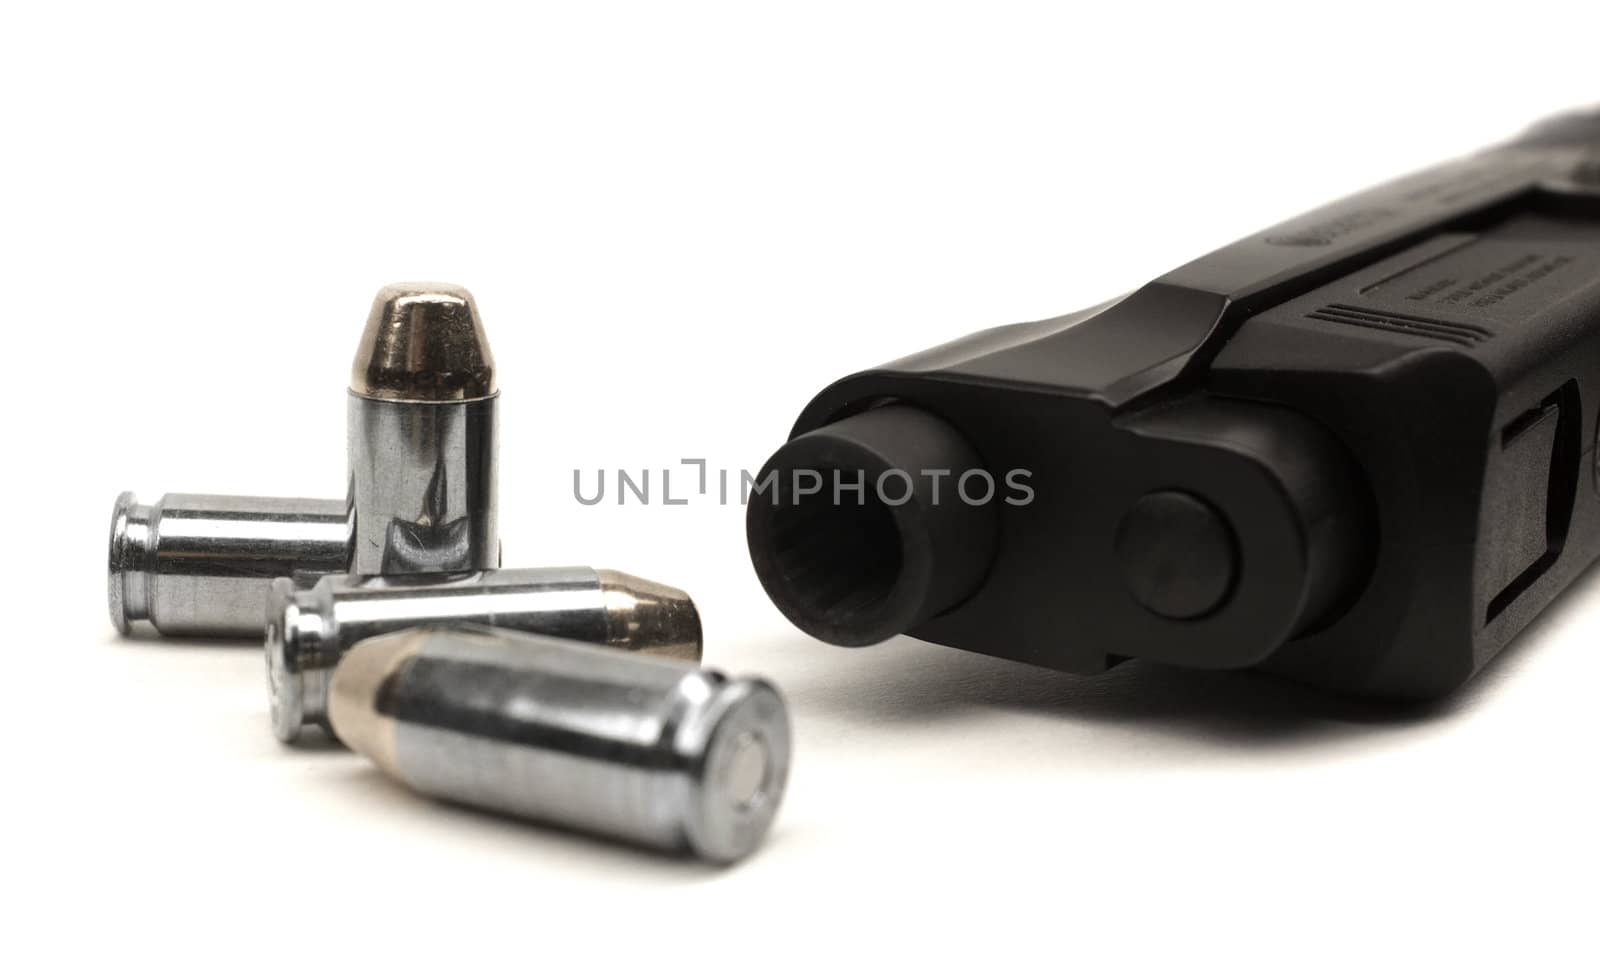 bullets isolated on a white background. Gun control bullets